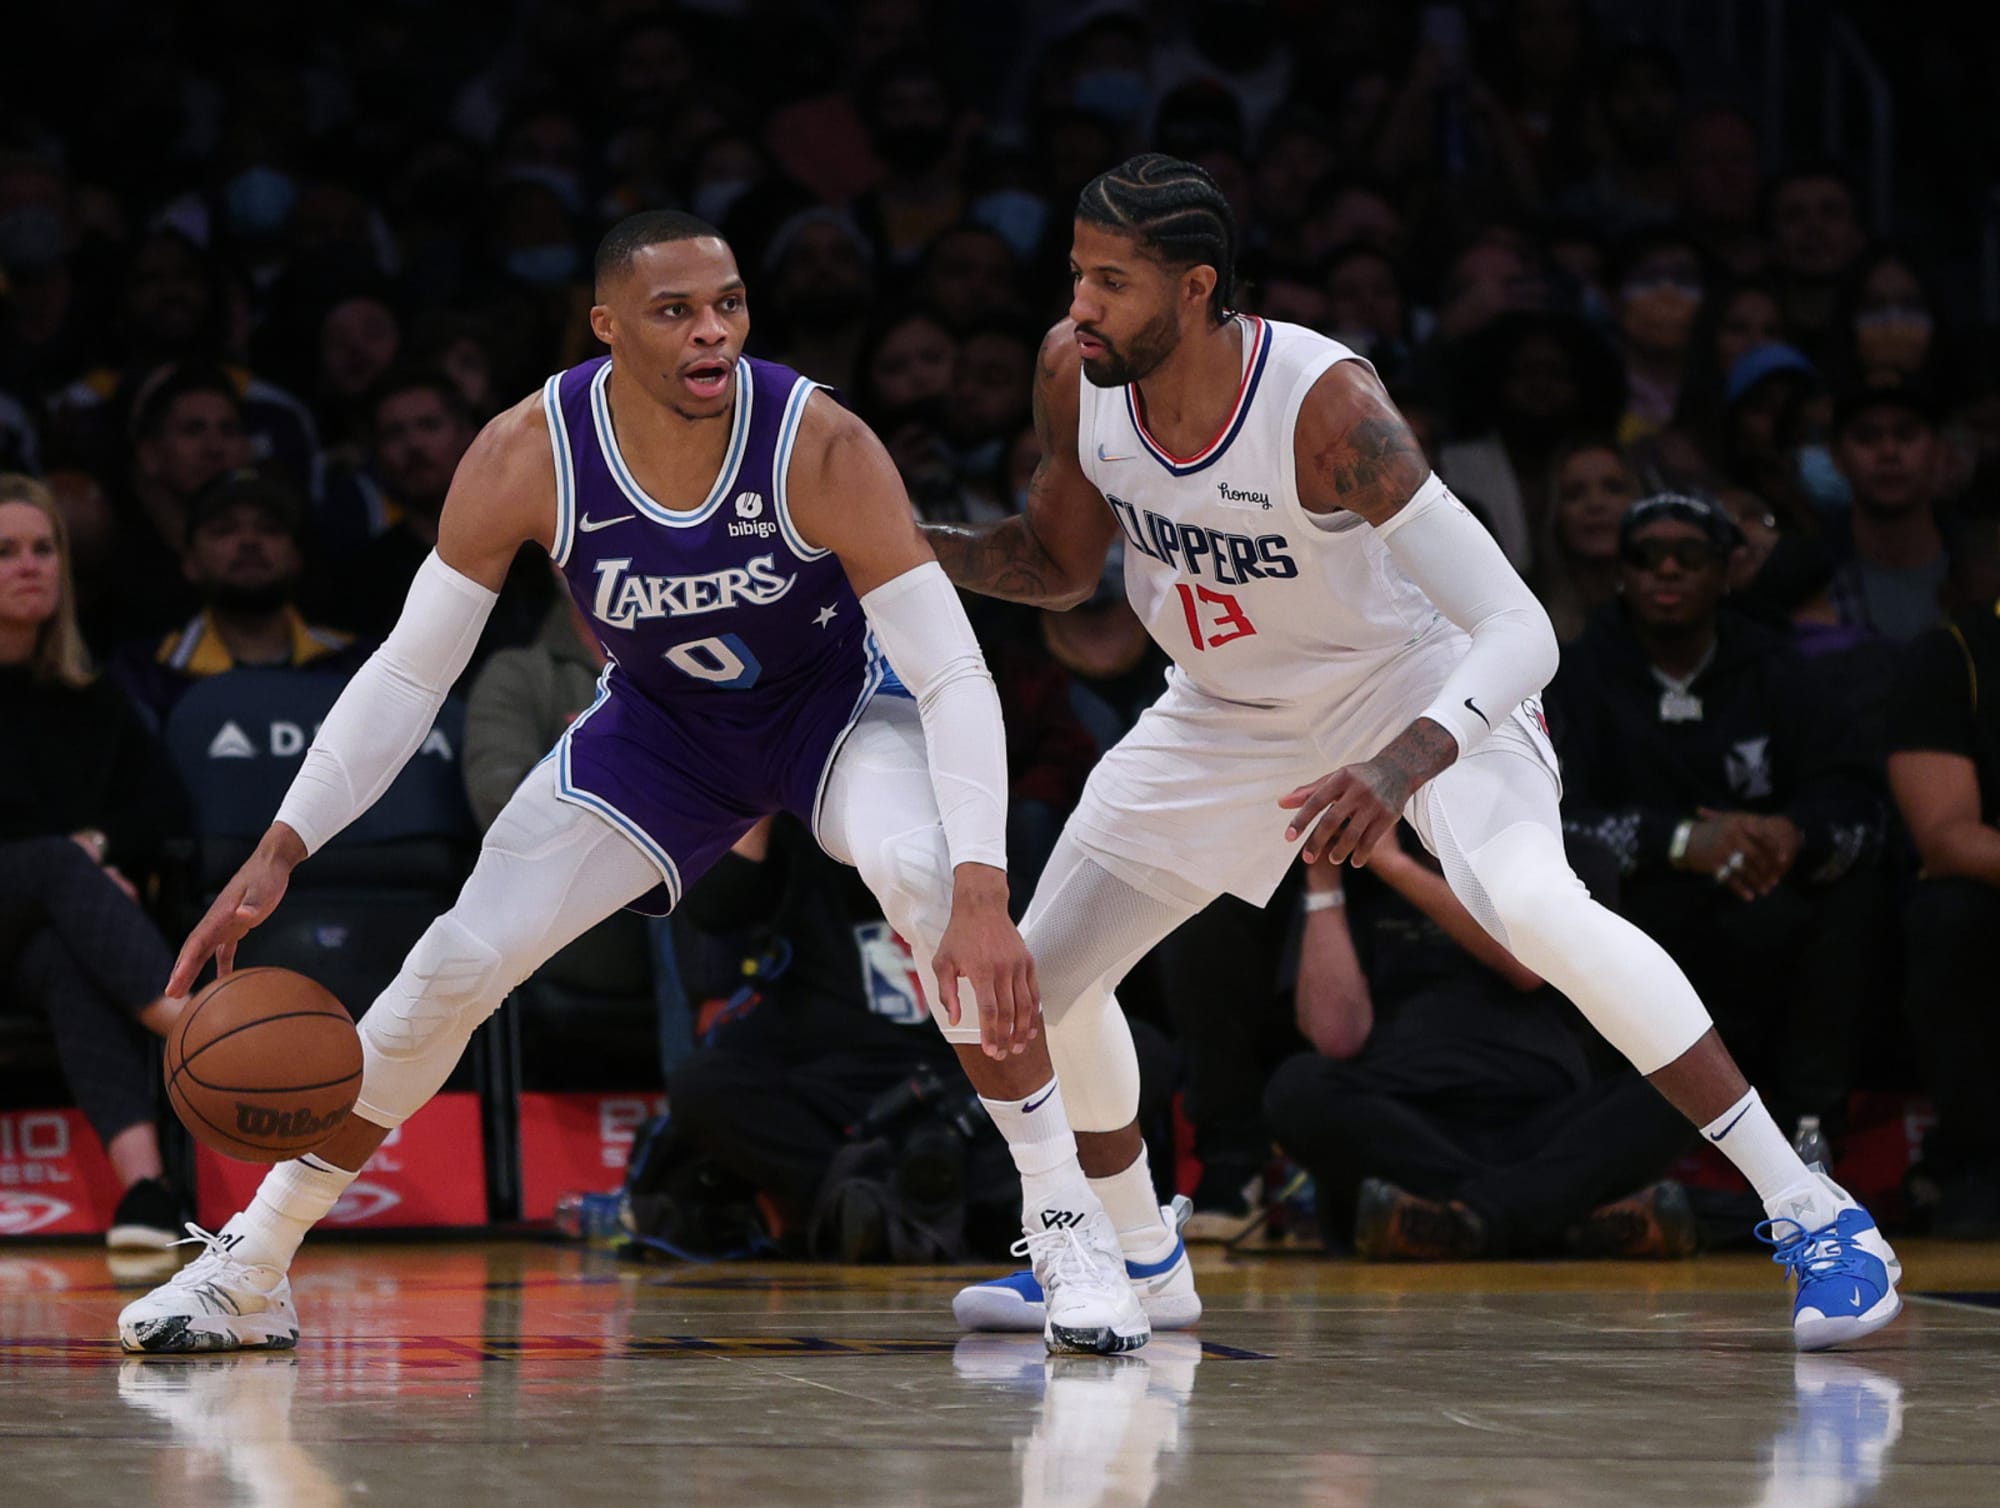 Lakers Twitter reacts to Russell Westbrook signing with rival Clippers